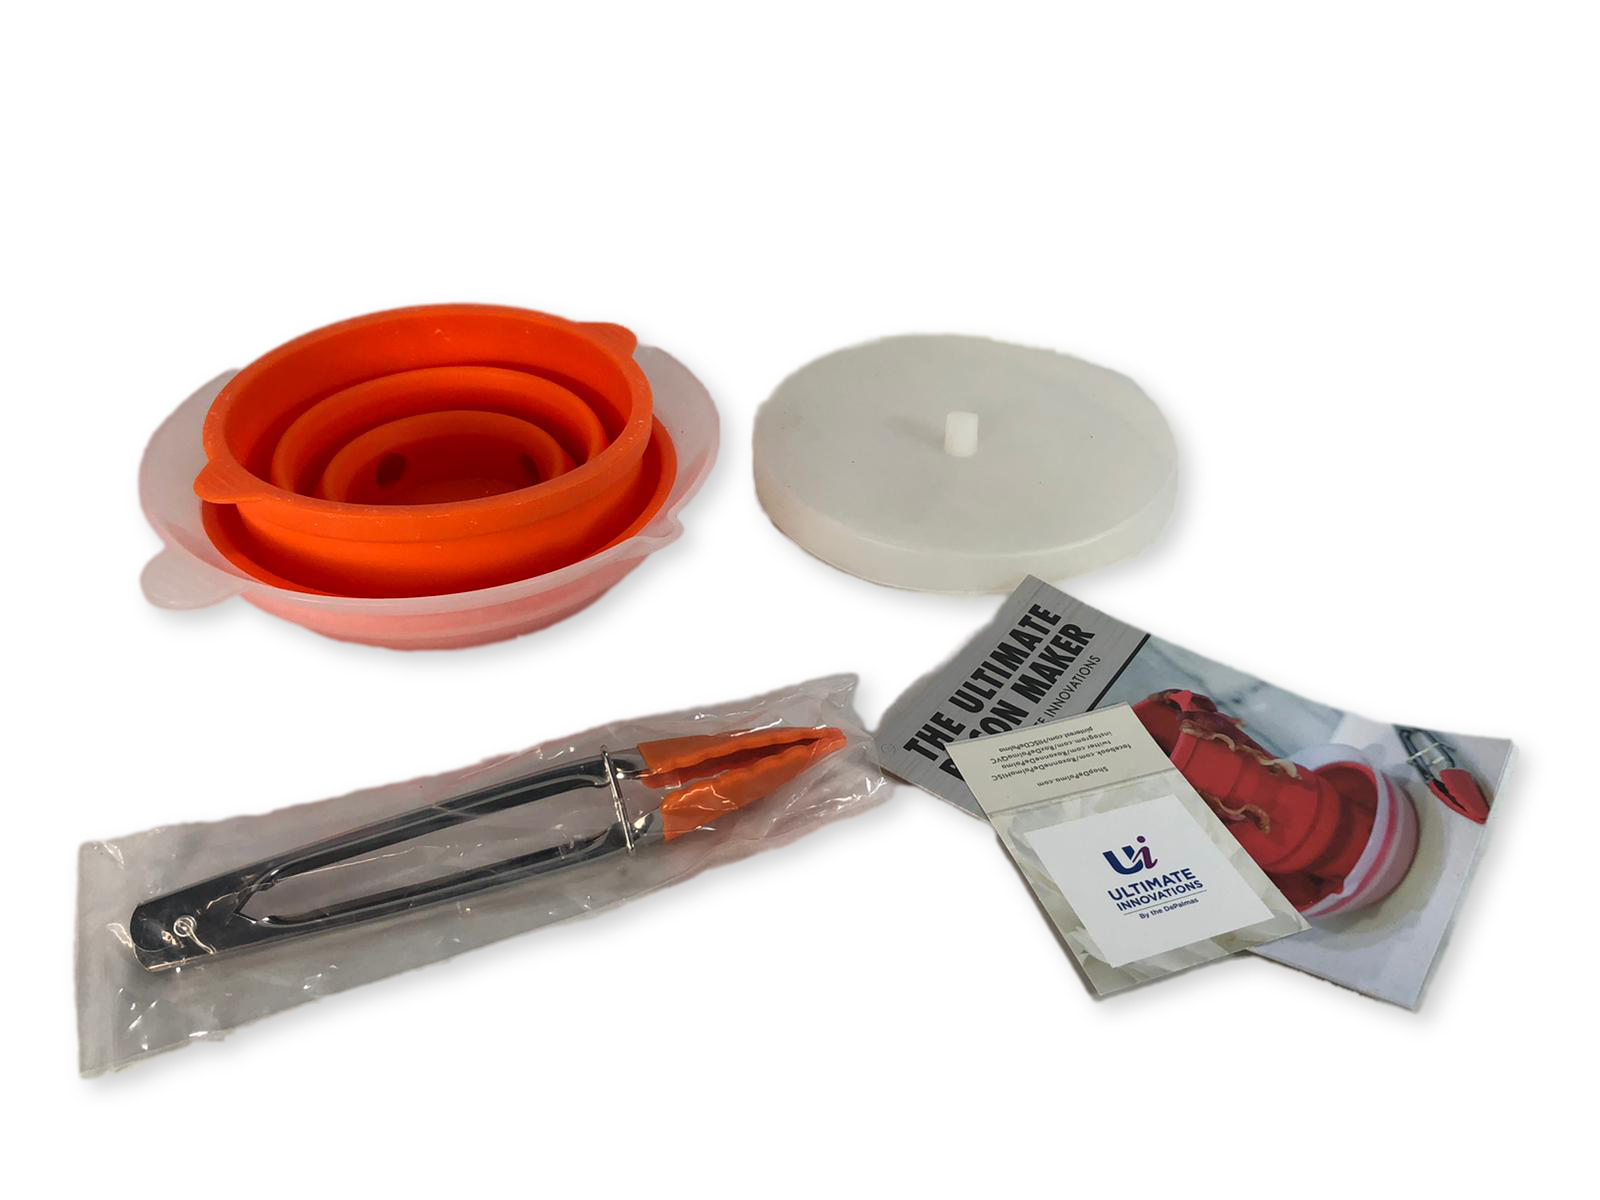 Ultimate Innovations Collapsible Microwave Bacon Maker Set